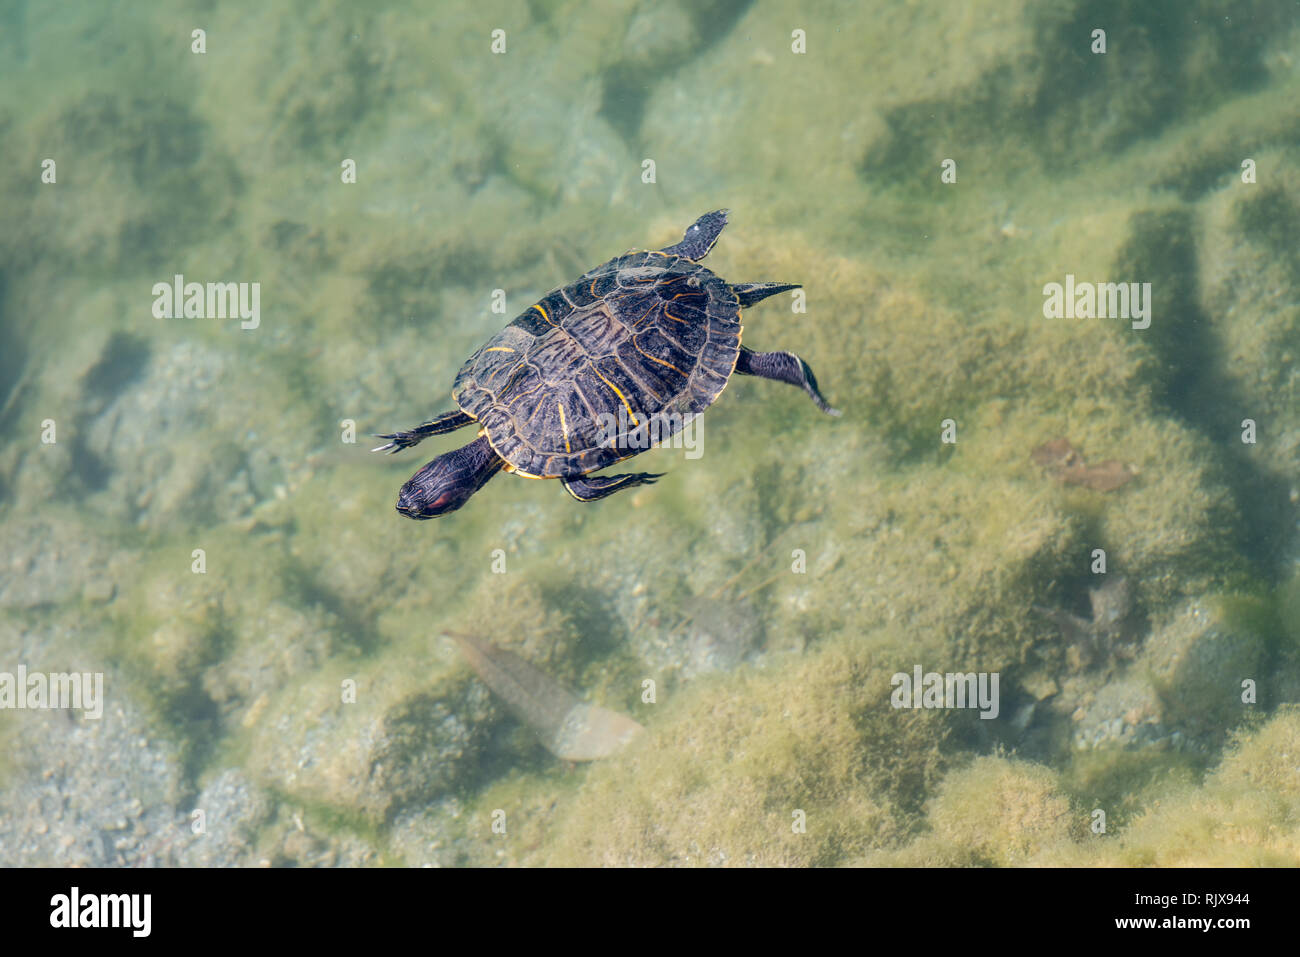 turtle swimming in a pond Stock Photo